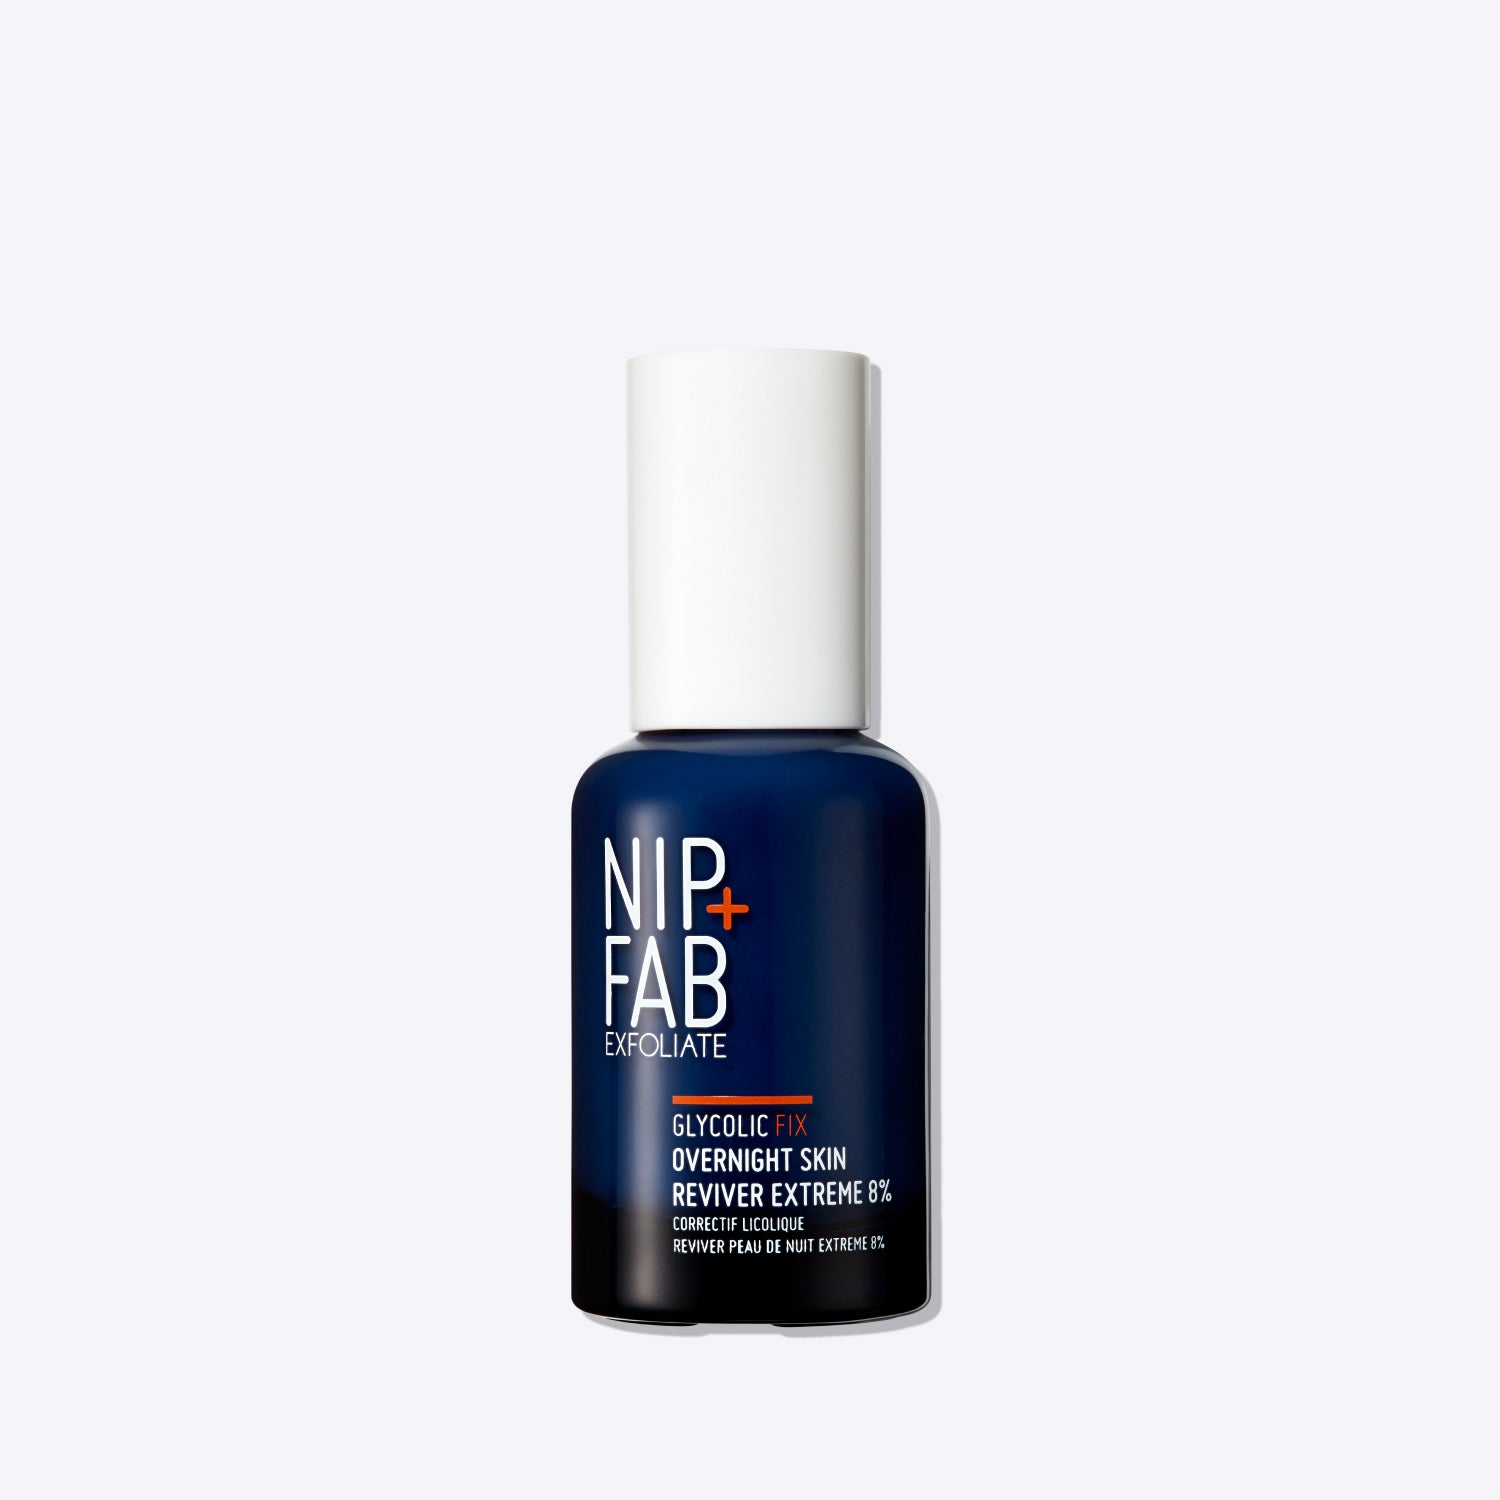 Glycolic Fix Overnight Skin Reviver Extreme 8 %